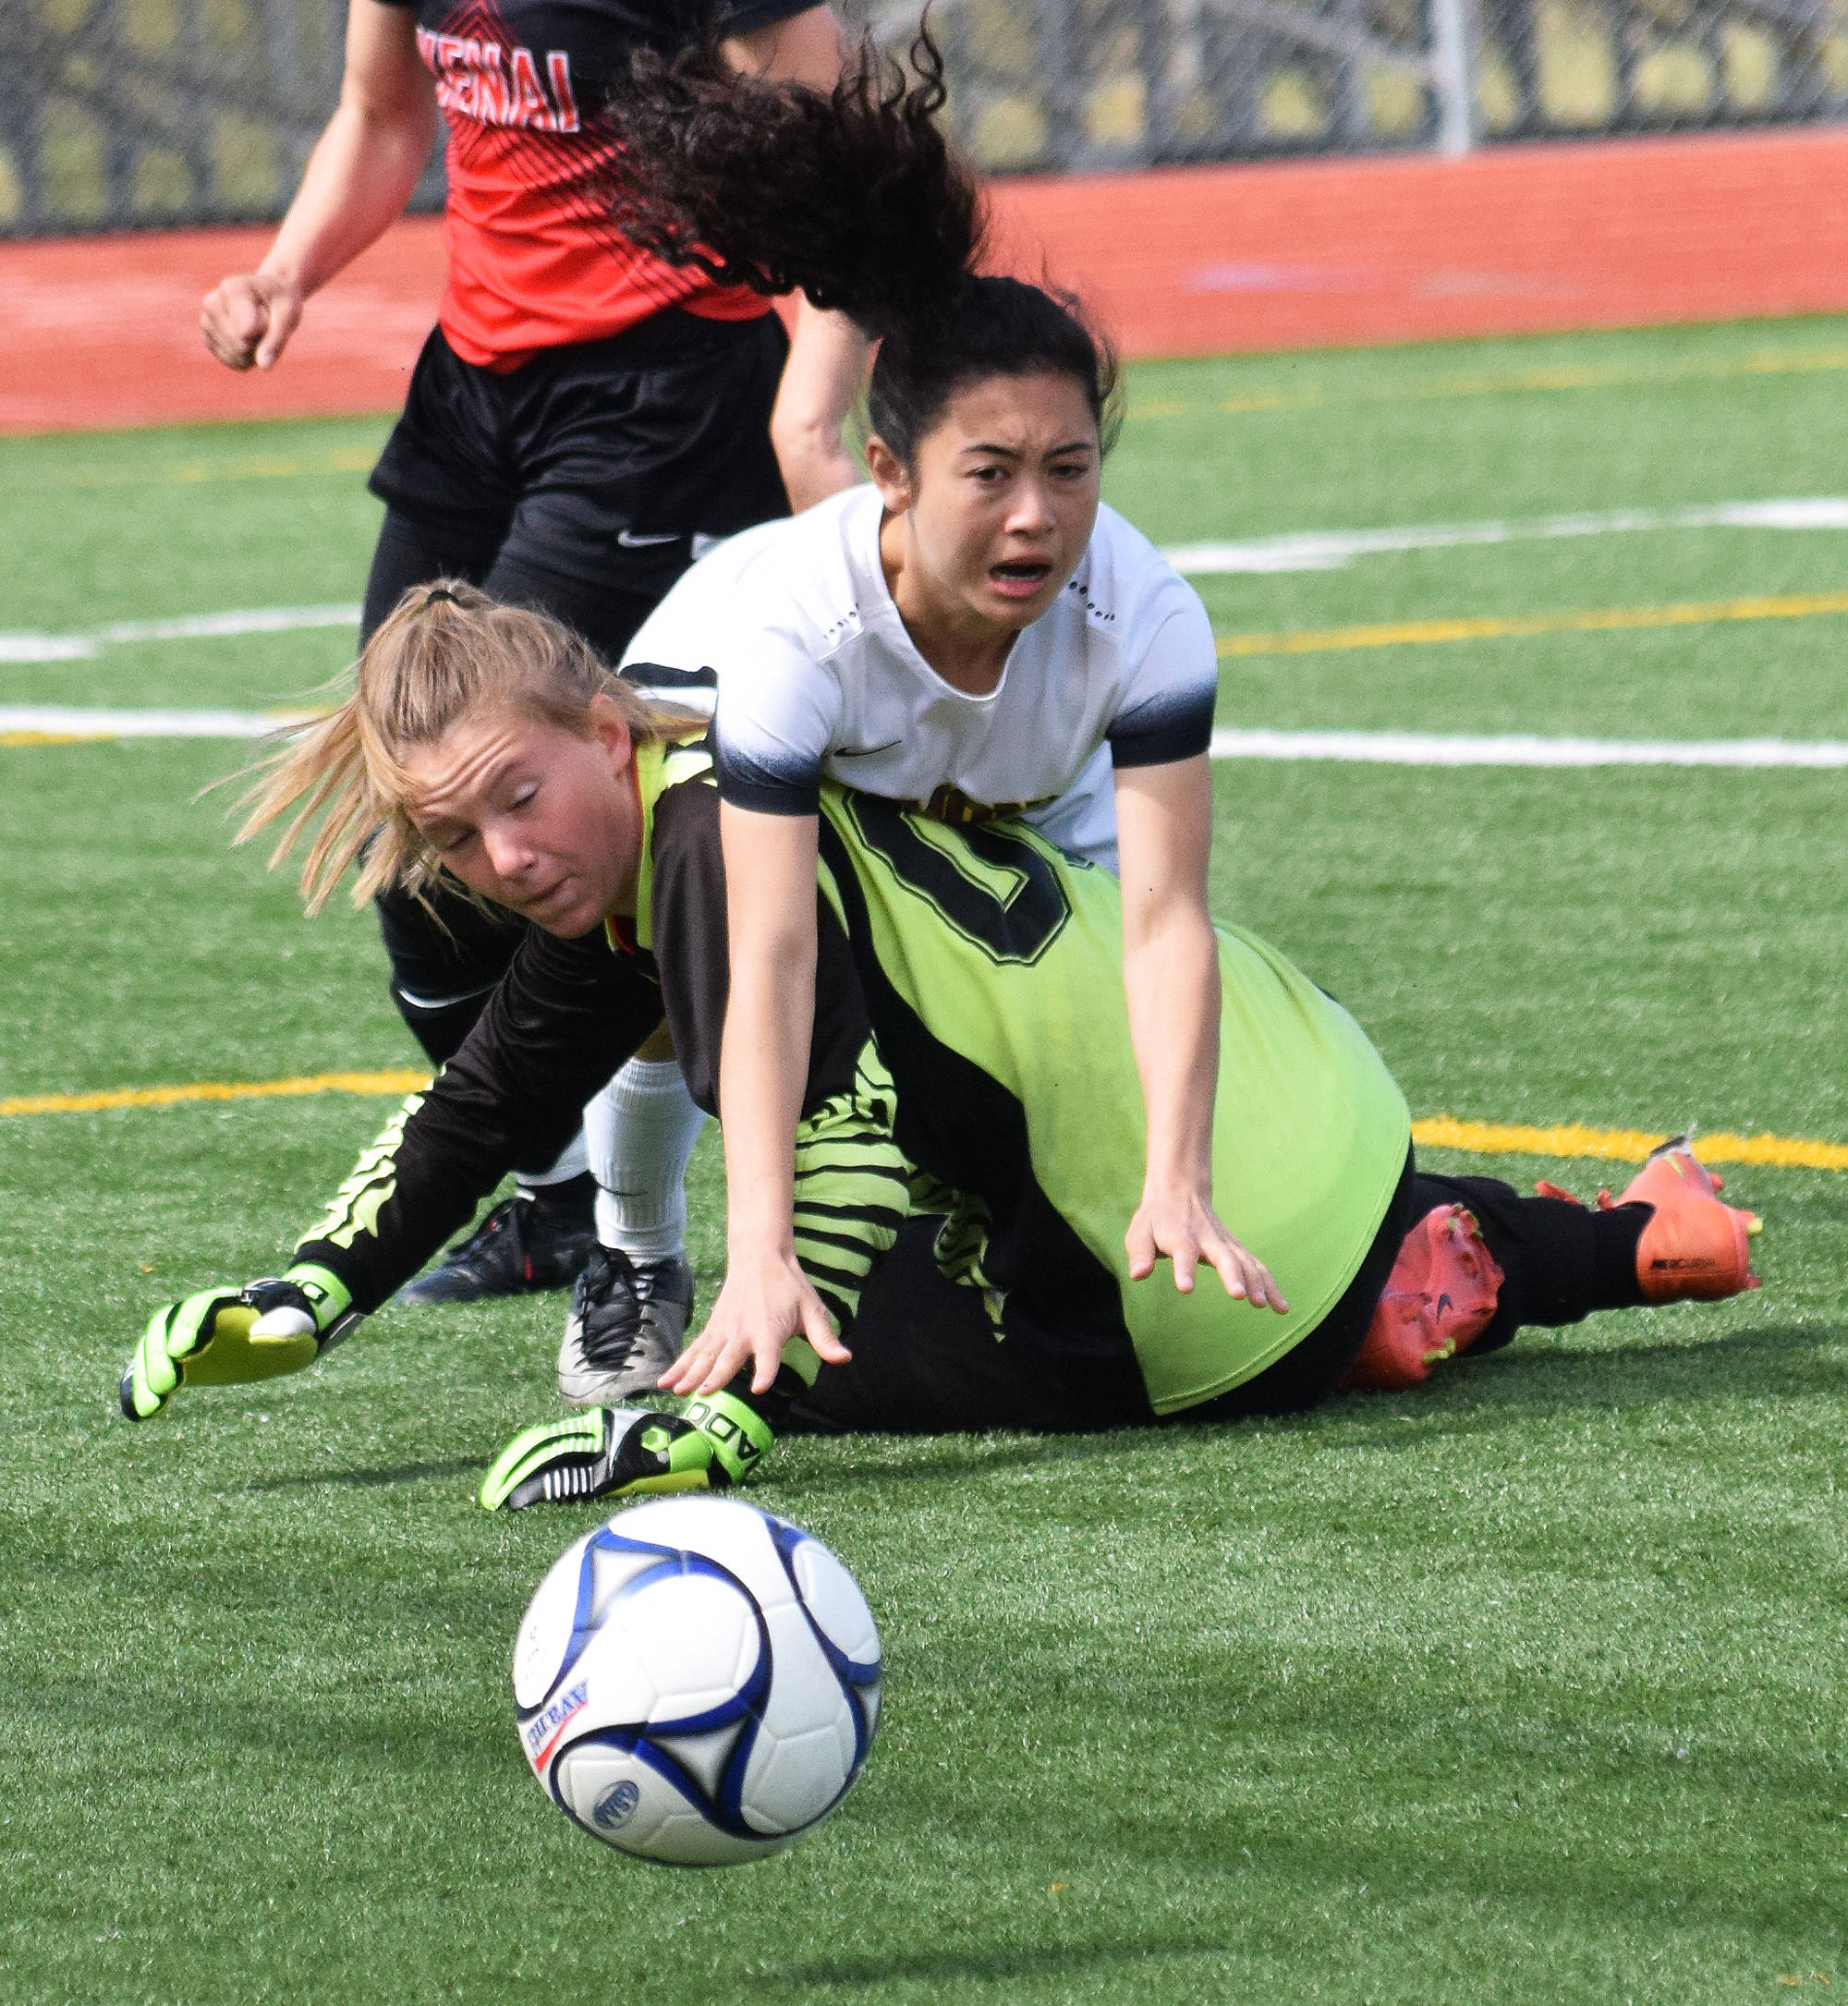 Dimond’s Allison Shafer collides with Kenai Central goalkeeper Kailey Hamilton in a quarterfinal matchup Thursday at the state soccer tournament at Eagle River High School. (Photo by Joey Klecka/Peninsula Clarion)